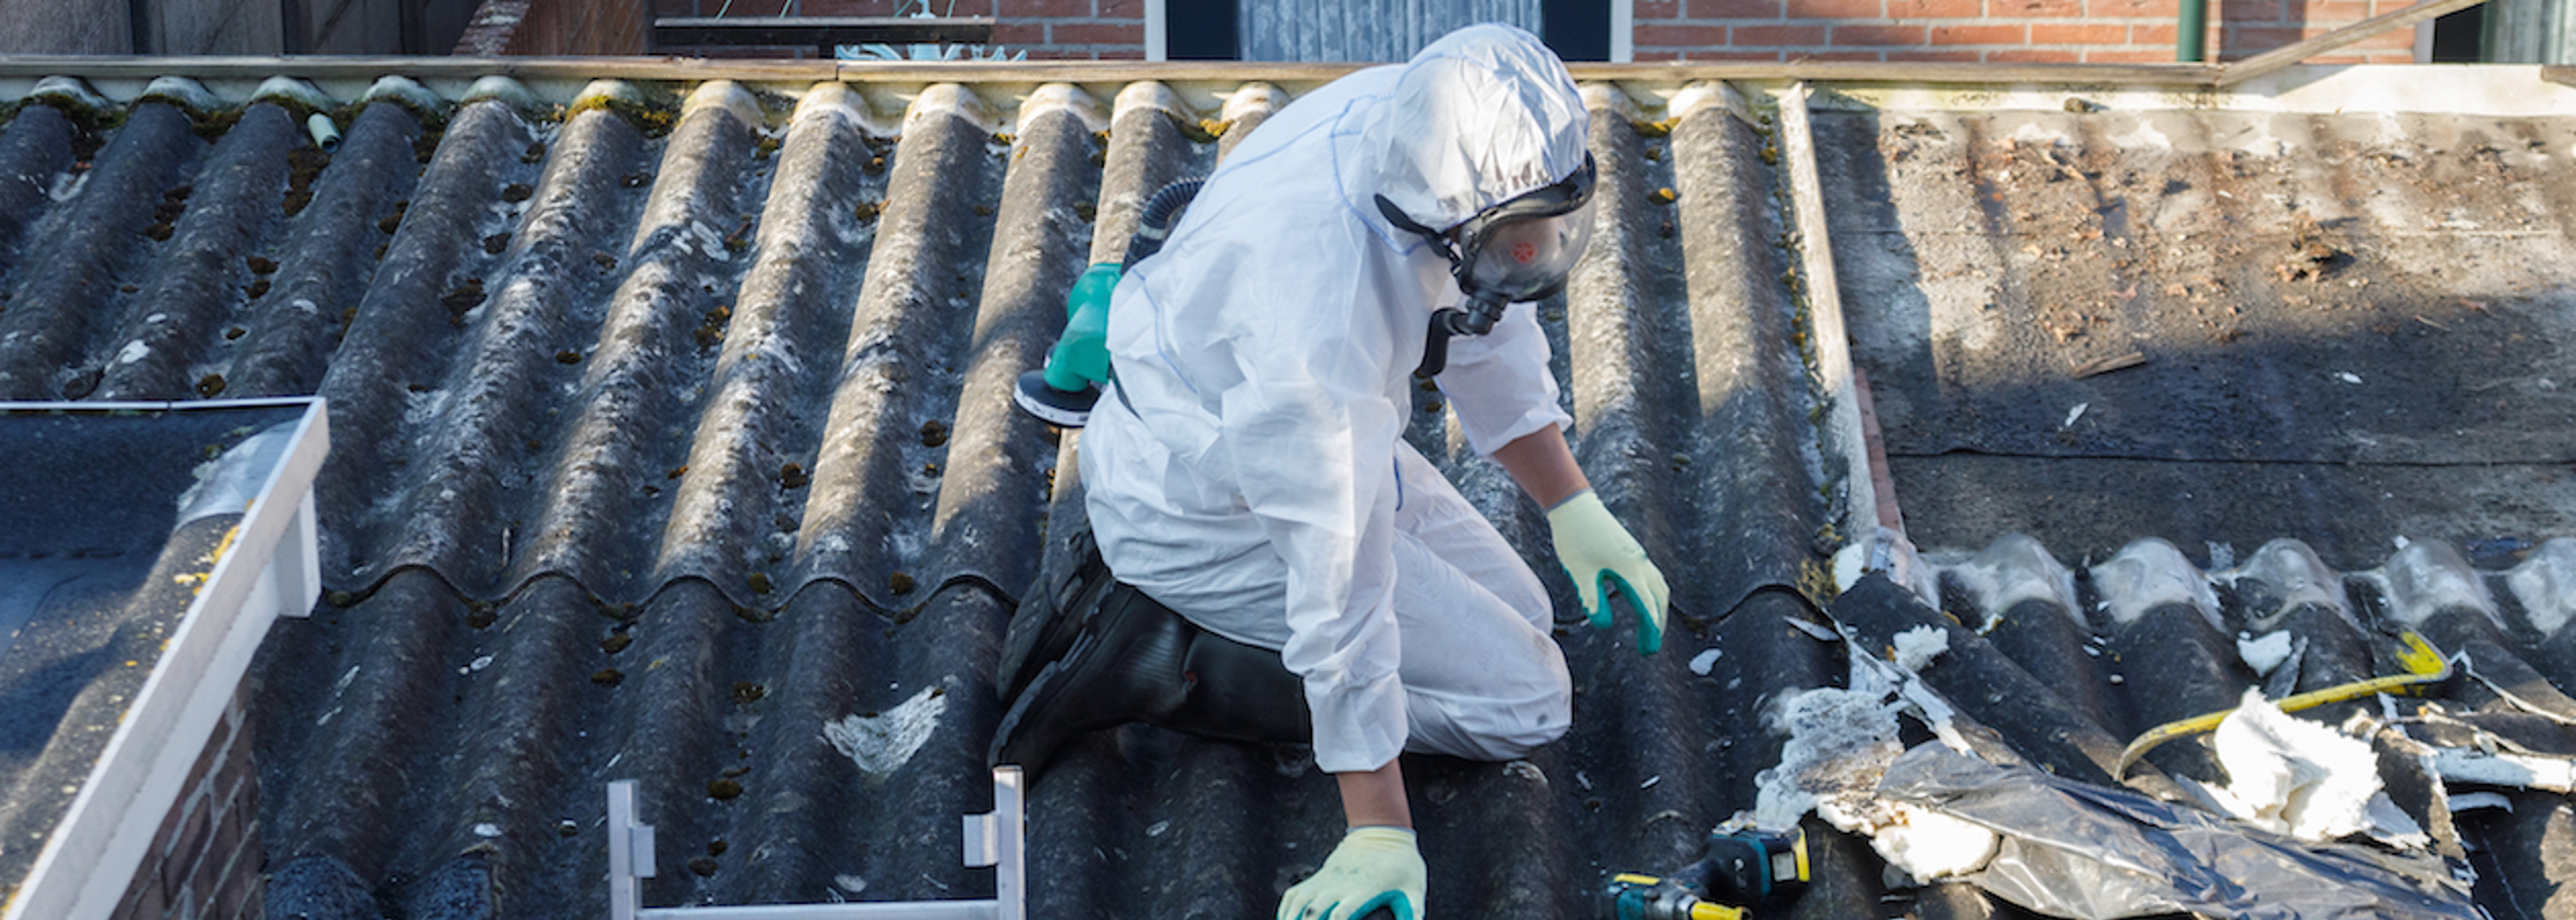 Removing asbestos from schools an ‘urgent priority’